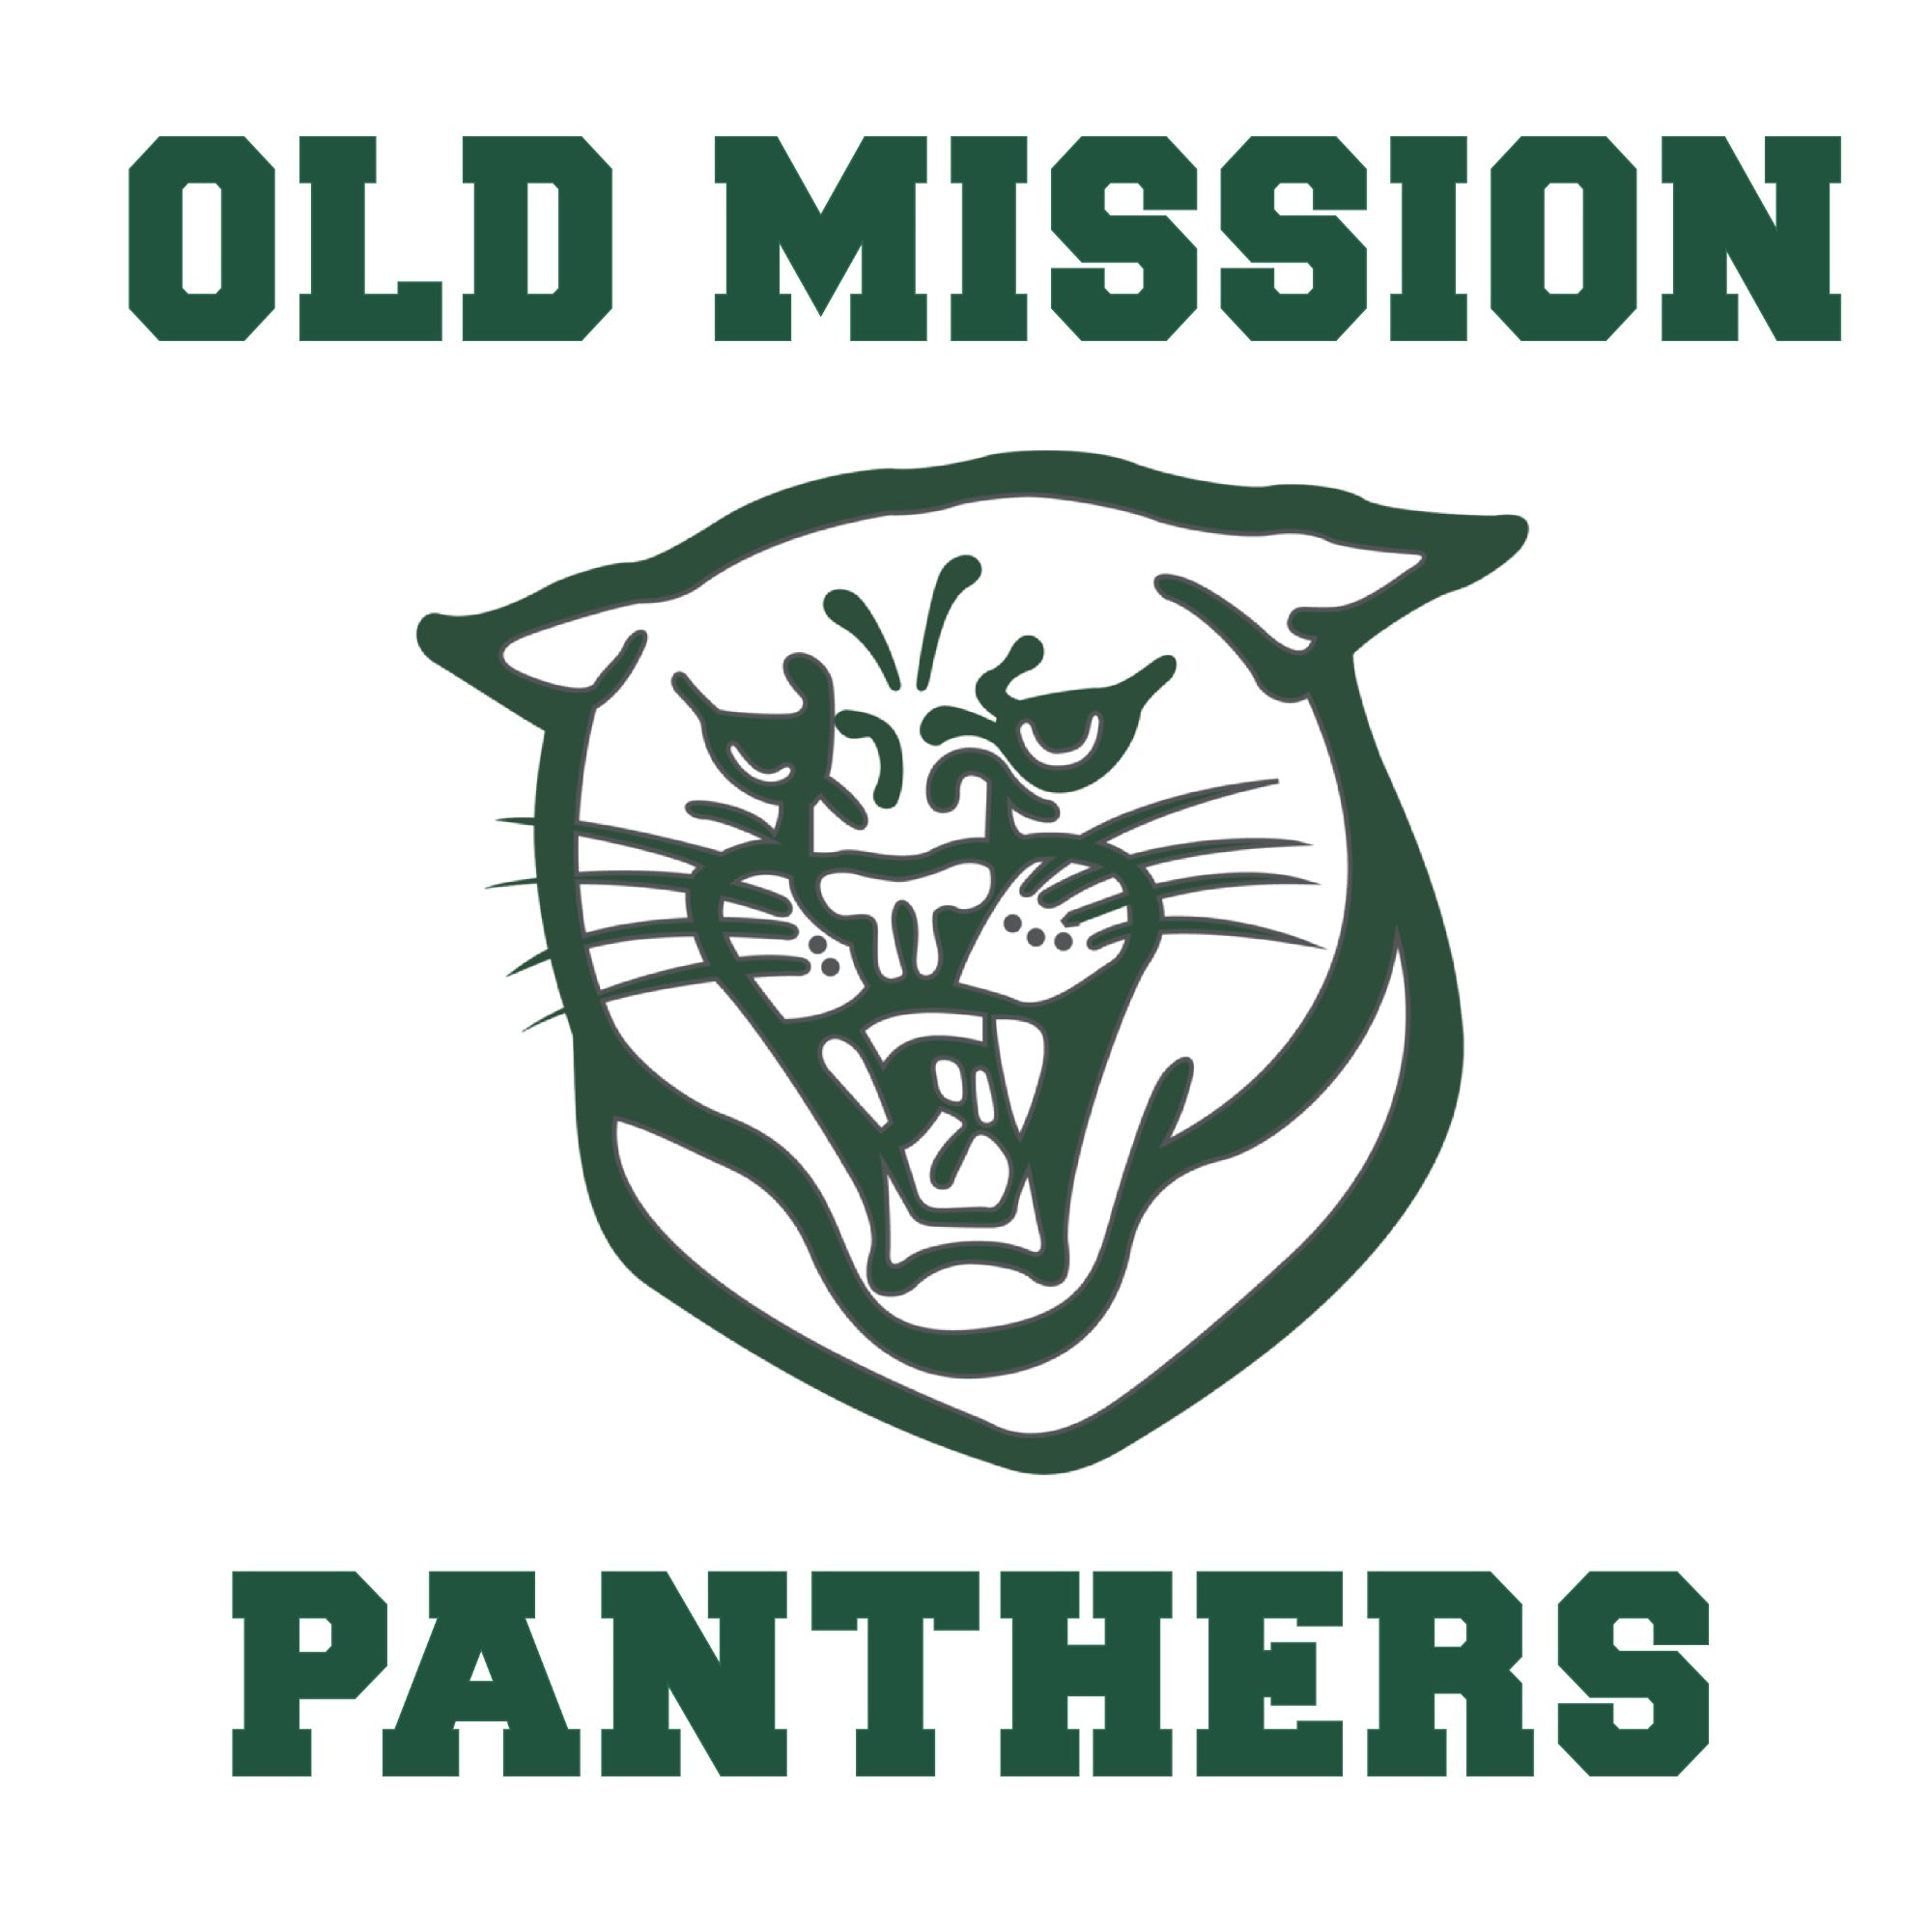 Old Mission Panthers Square Vinyl Sticker